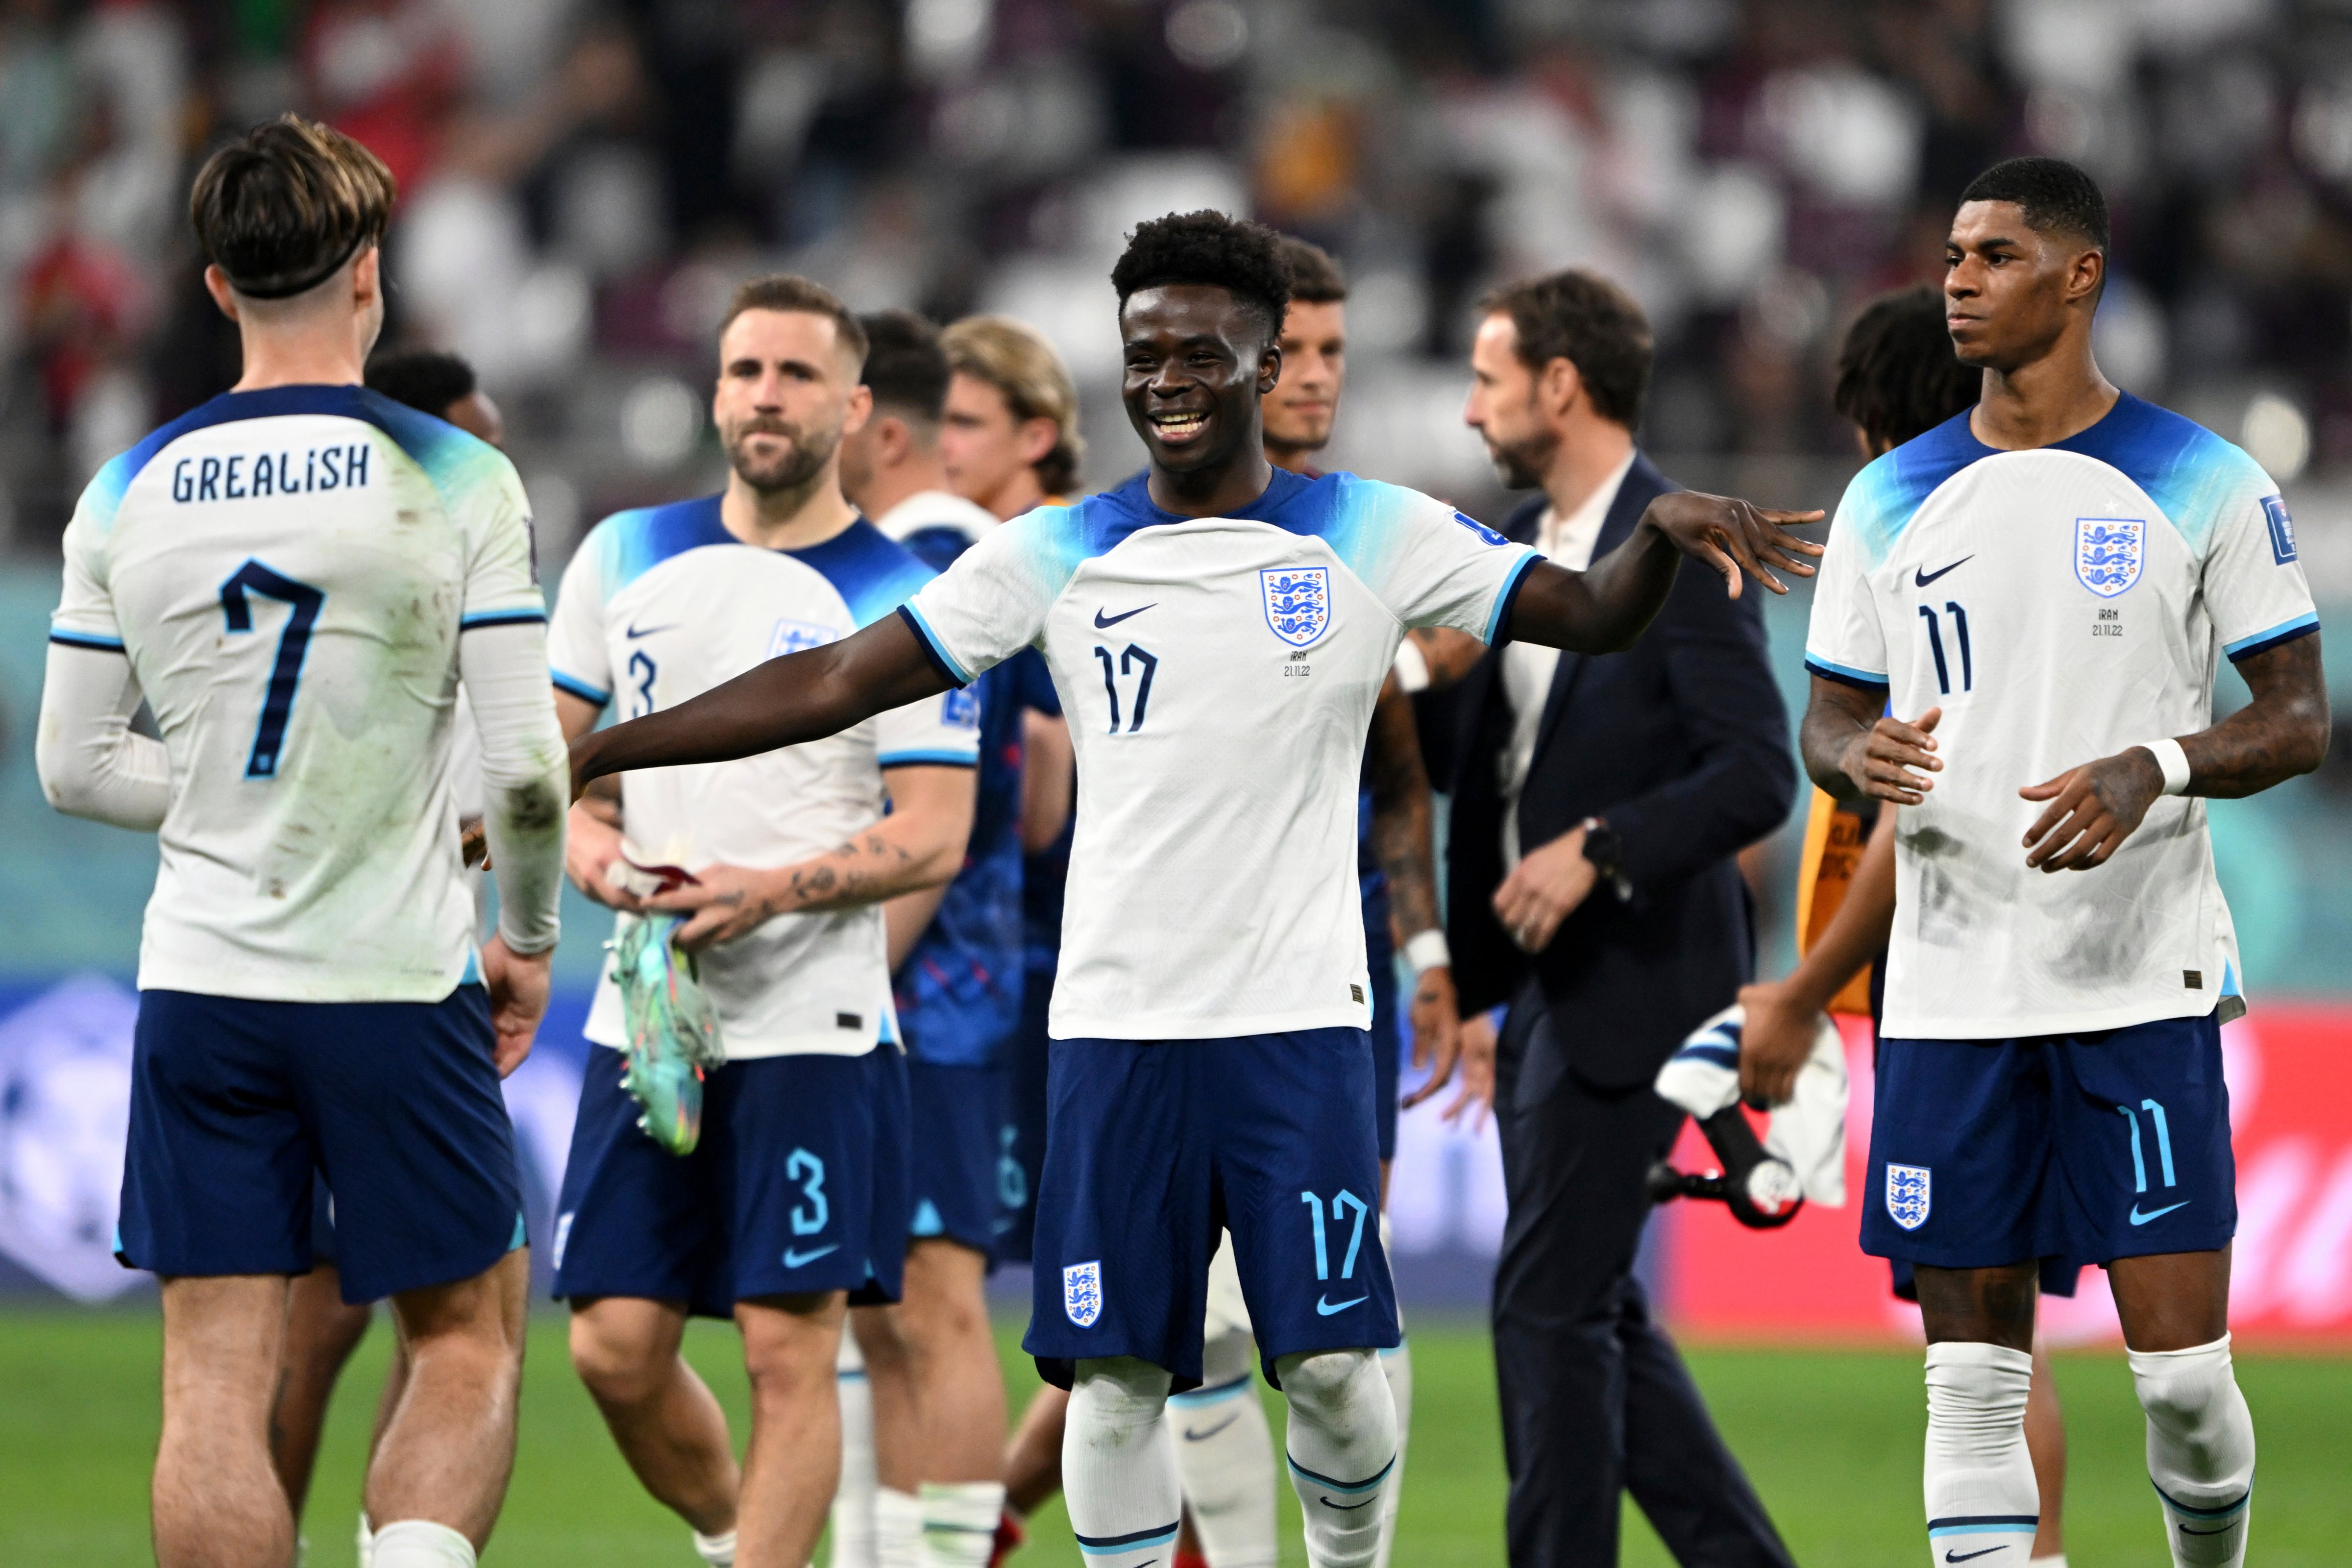 England's Bukayo Saka cheers after the final whistle, having scored two of the Three Lions' six goals against Iran. Coach Gareth Southgate walks in the background, at Qatar's Chalifa International Stadium, Nov. 21, 2022. (Robert Michael—picture-alliance/dpa/AP)